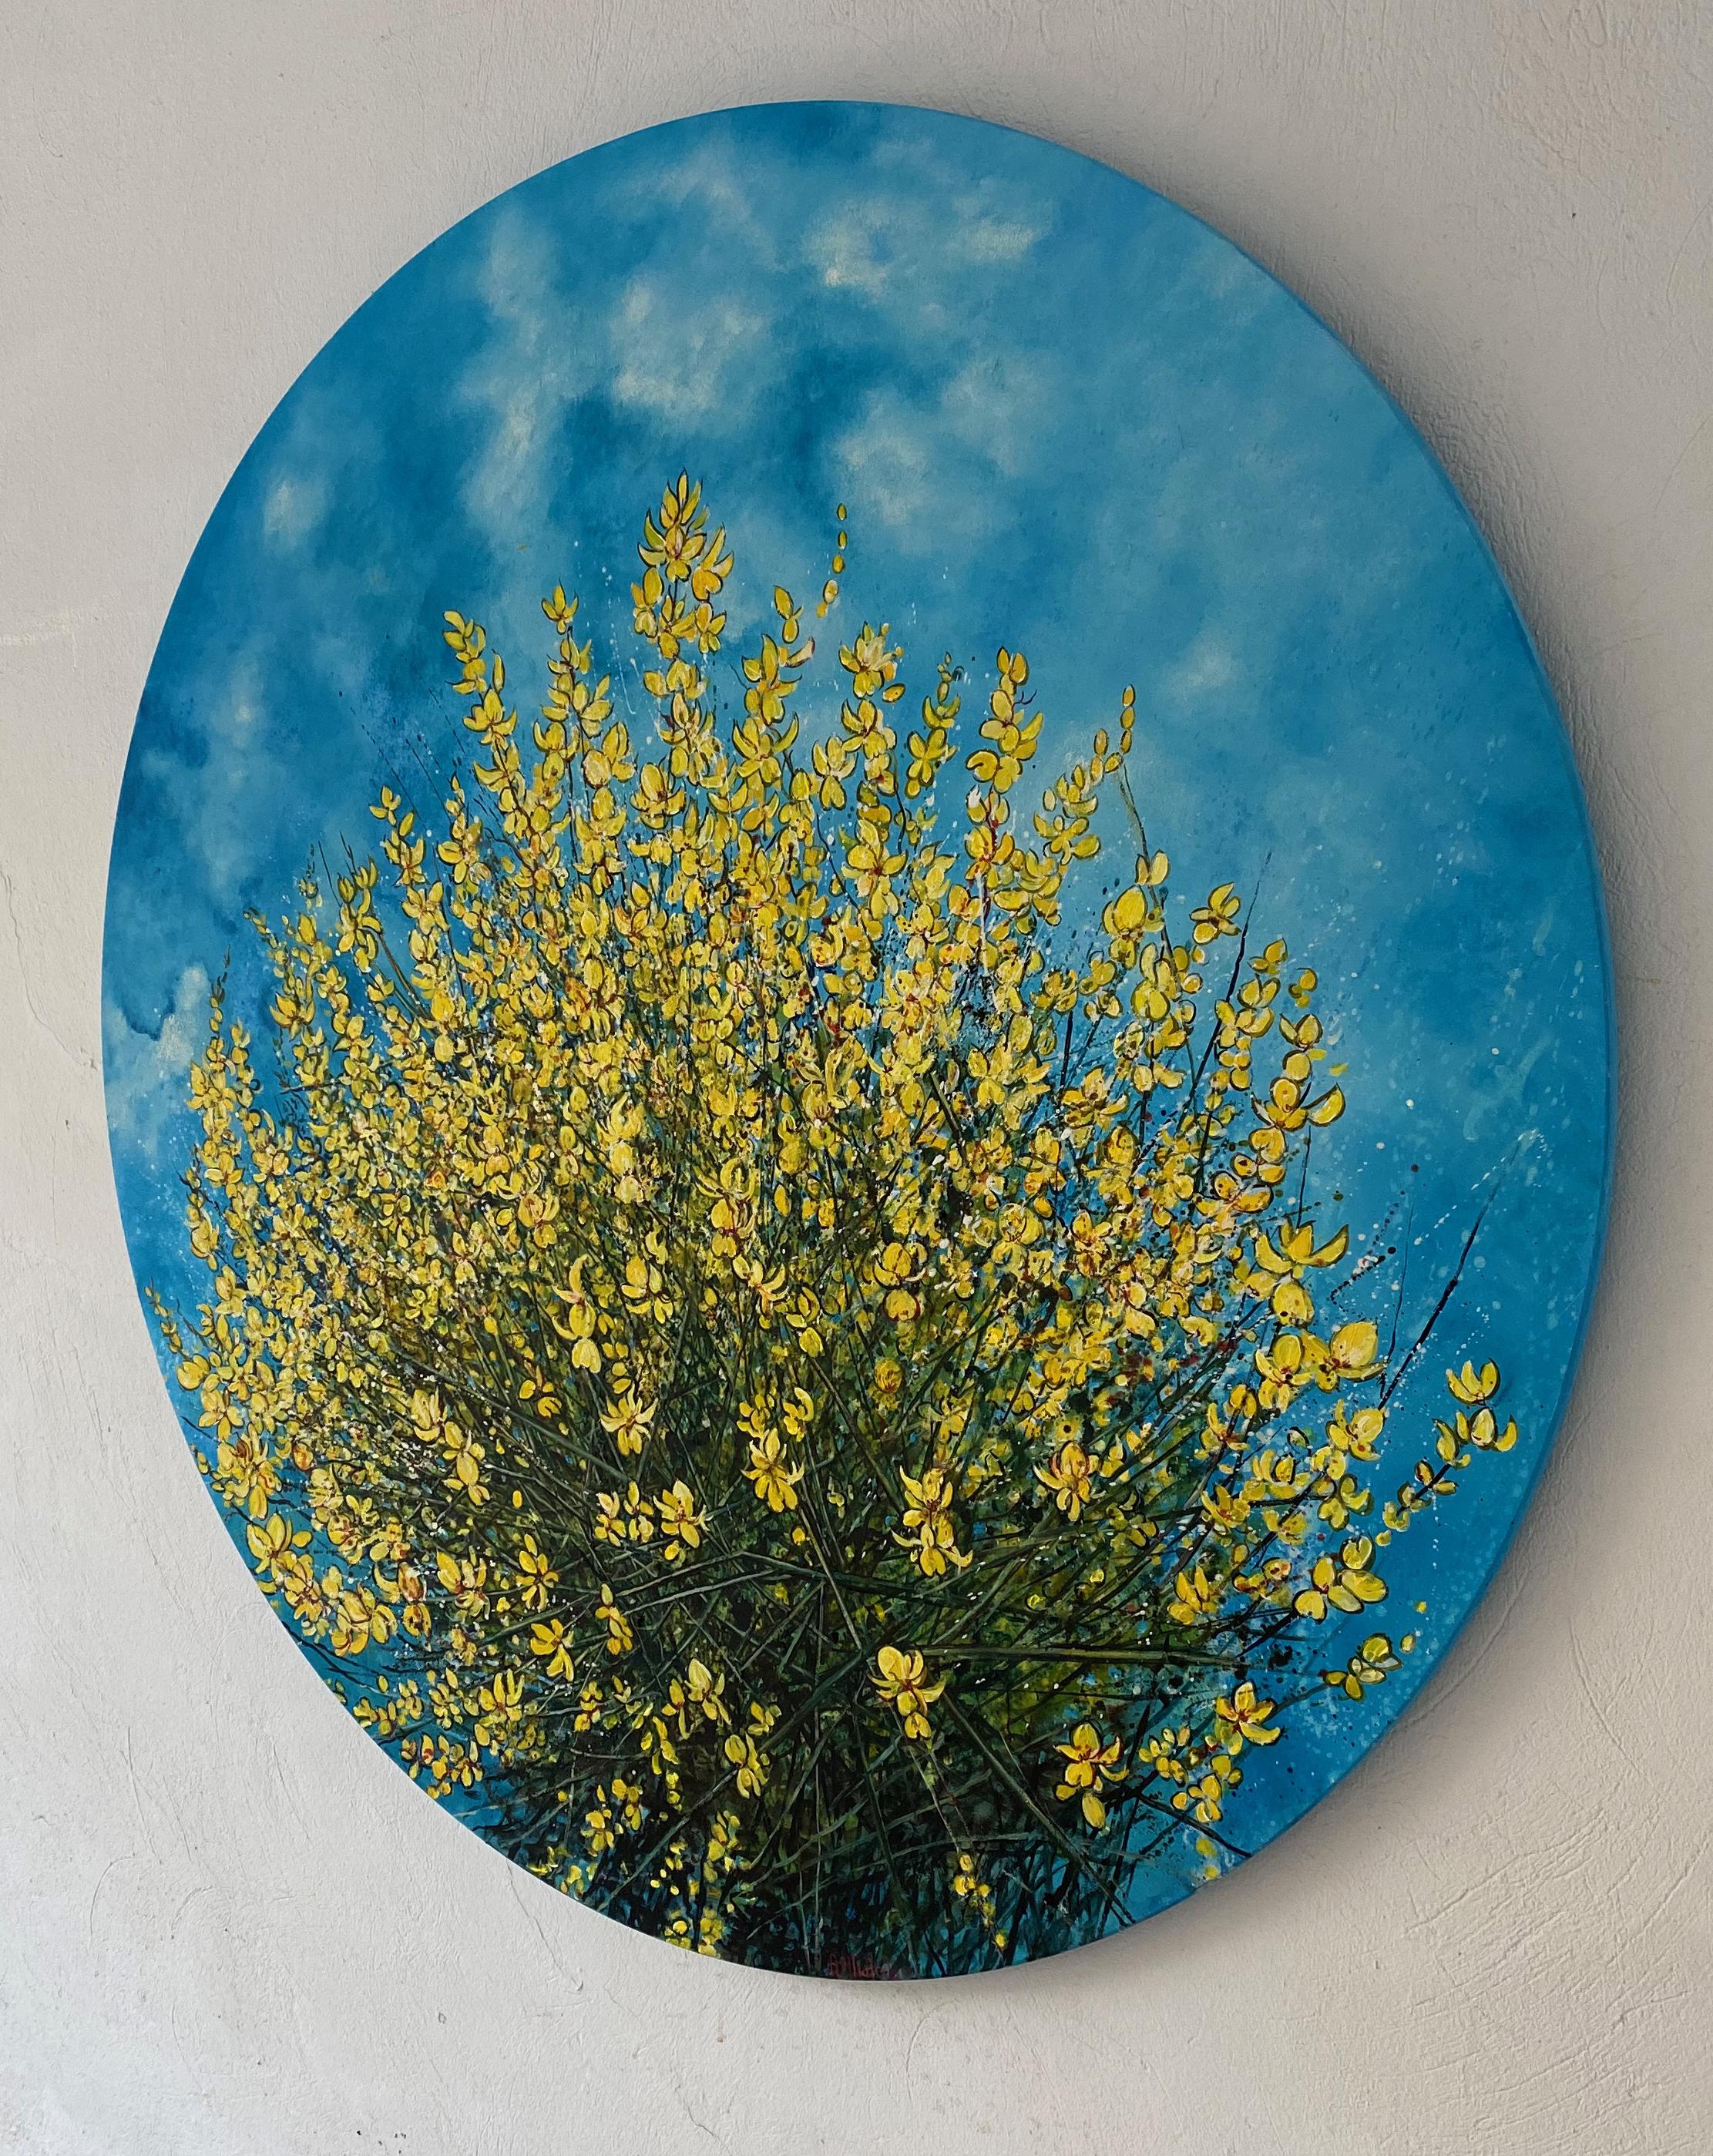 Flowers of Loussios - Circular oil painting, yellow wildflowers nature blue sky 2